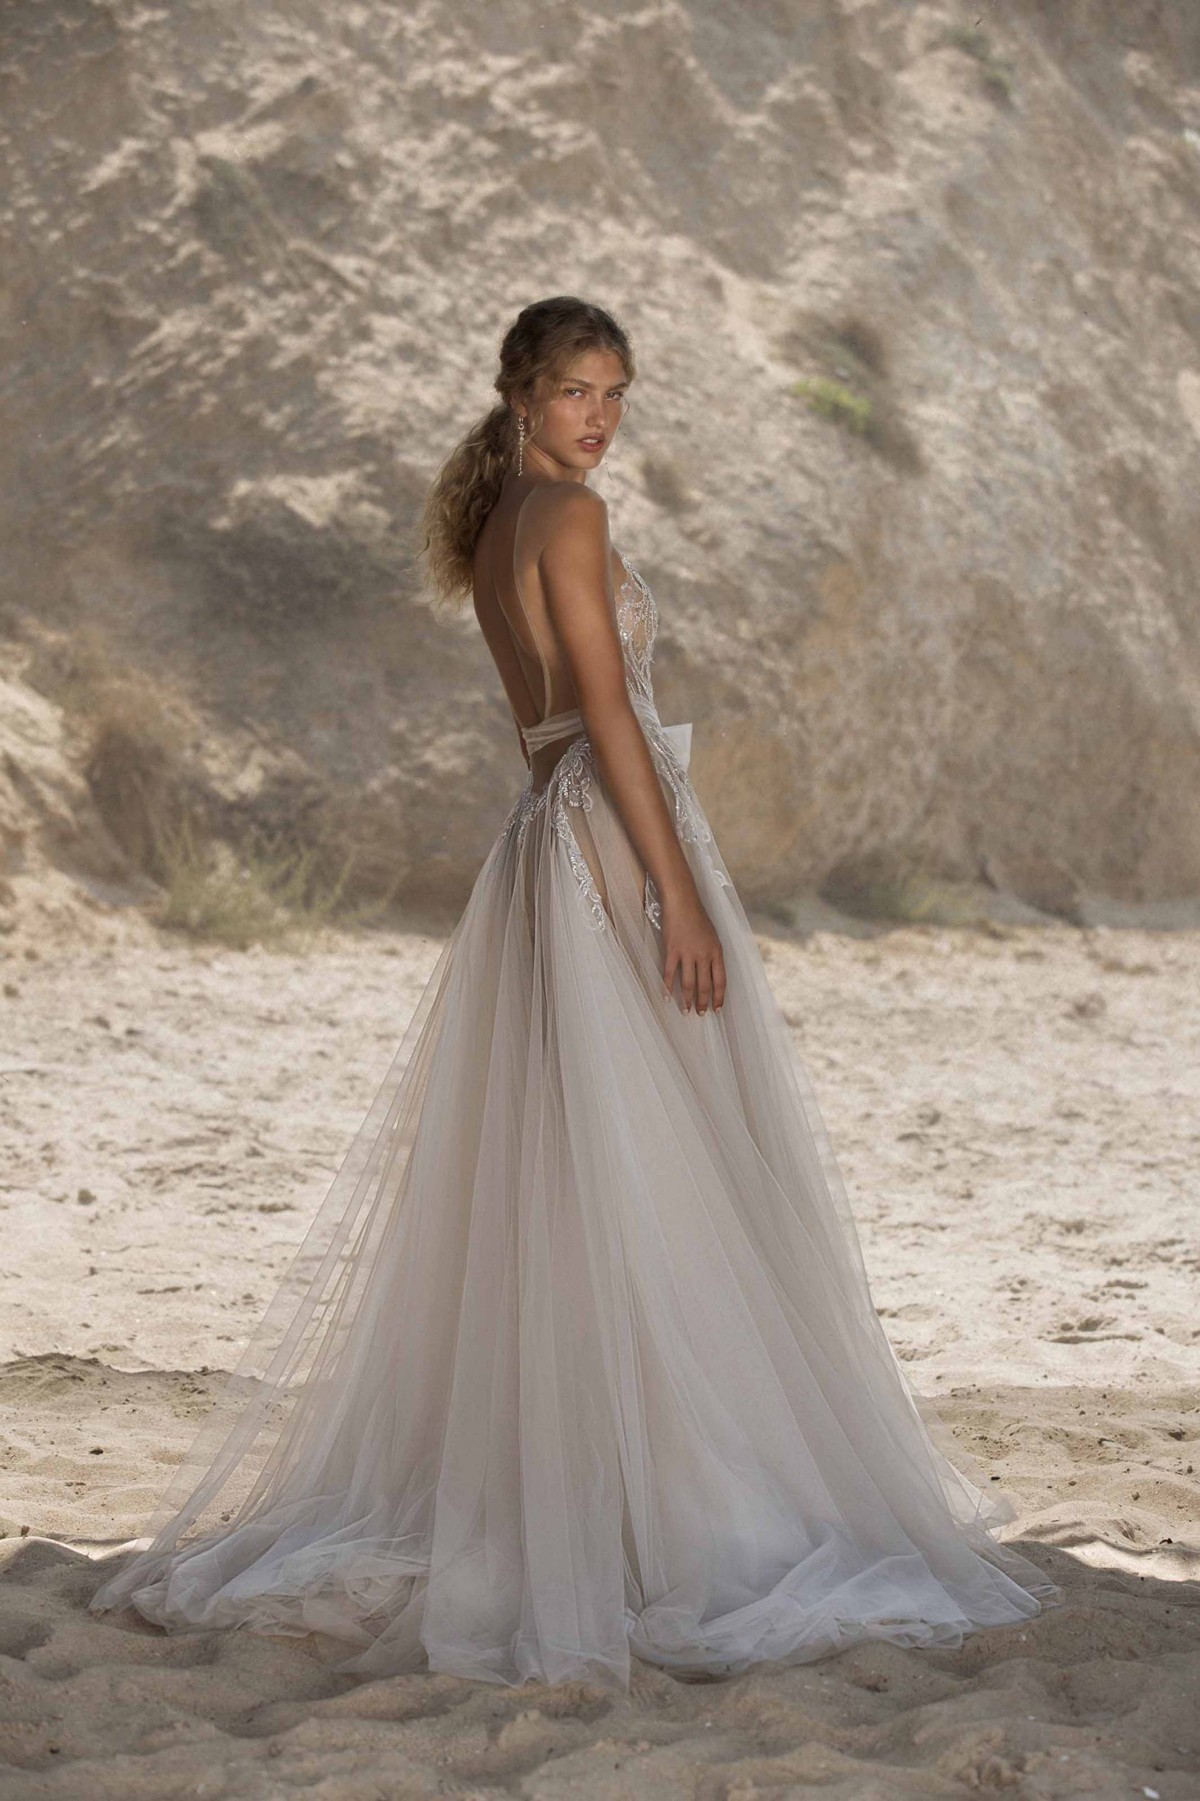 21-HAILEY Bridal Dress Inspirated By Berta Muse 2021 Vista Mare Collection